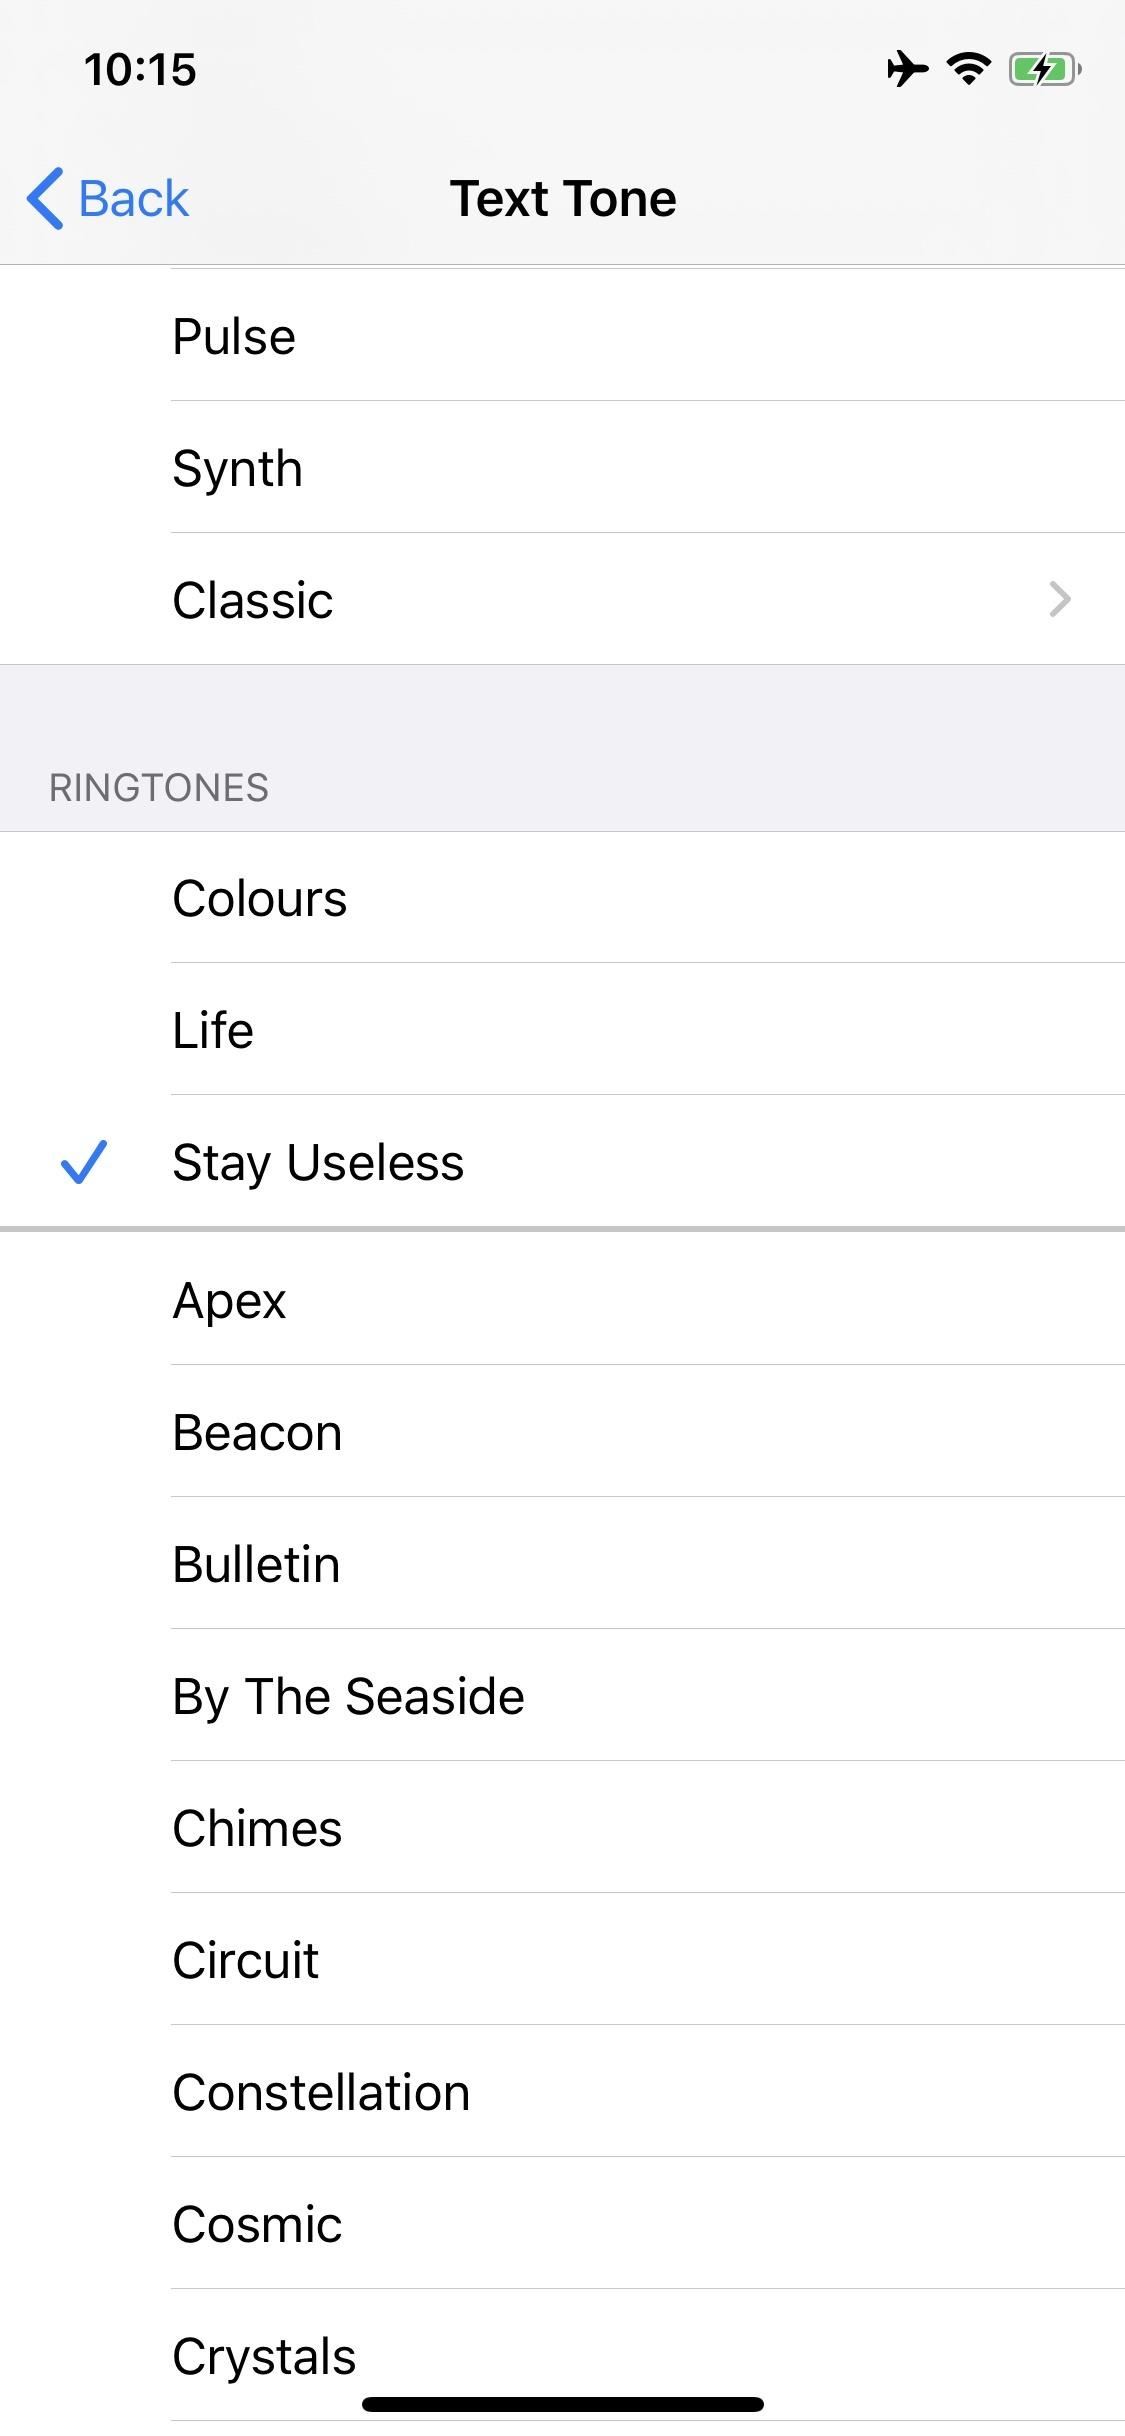 Create Custom Text Tones for Your iPhone Using macOS 10.15 Catalina